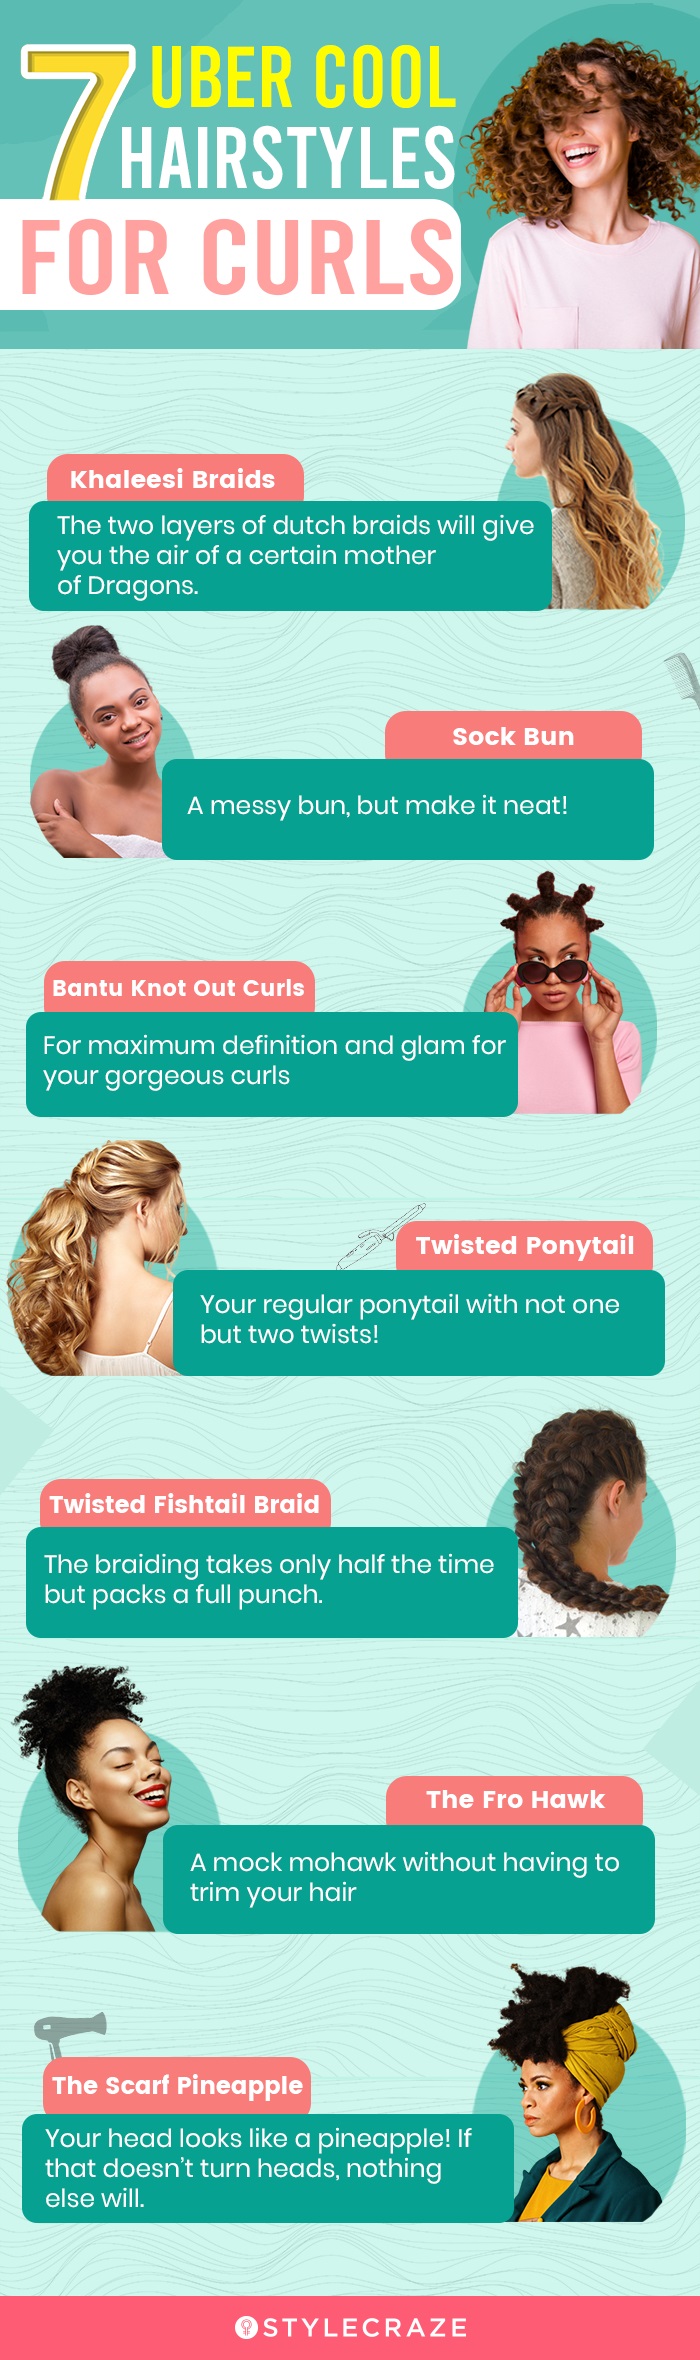 7 uber cool hairstyles for curls [infographic]